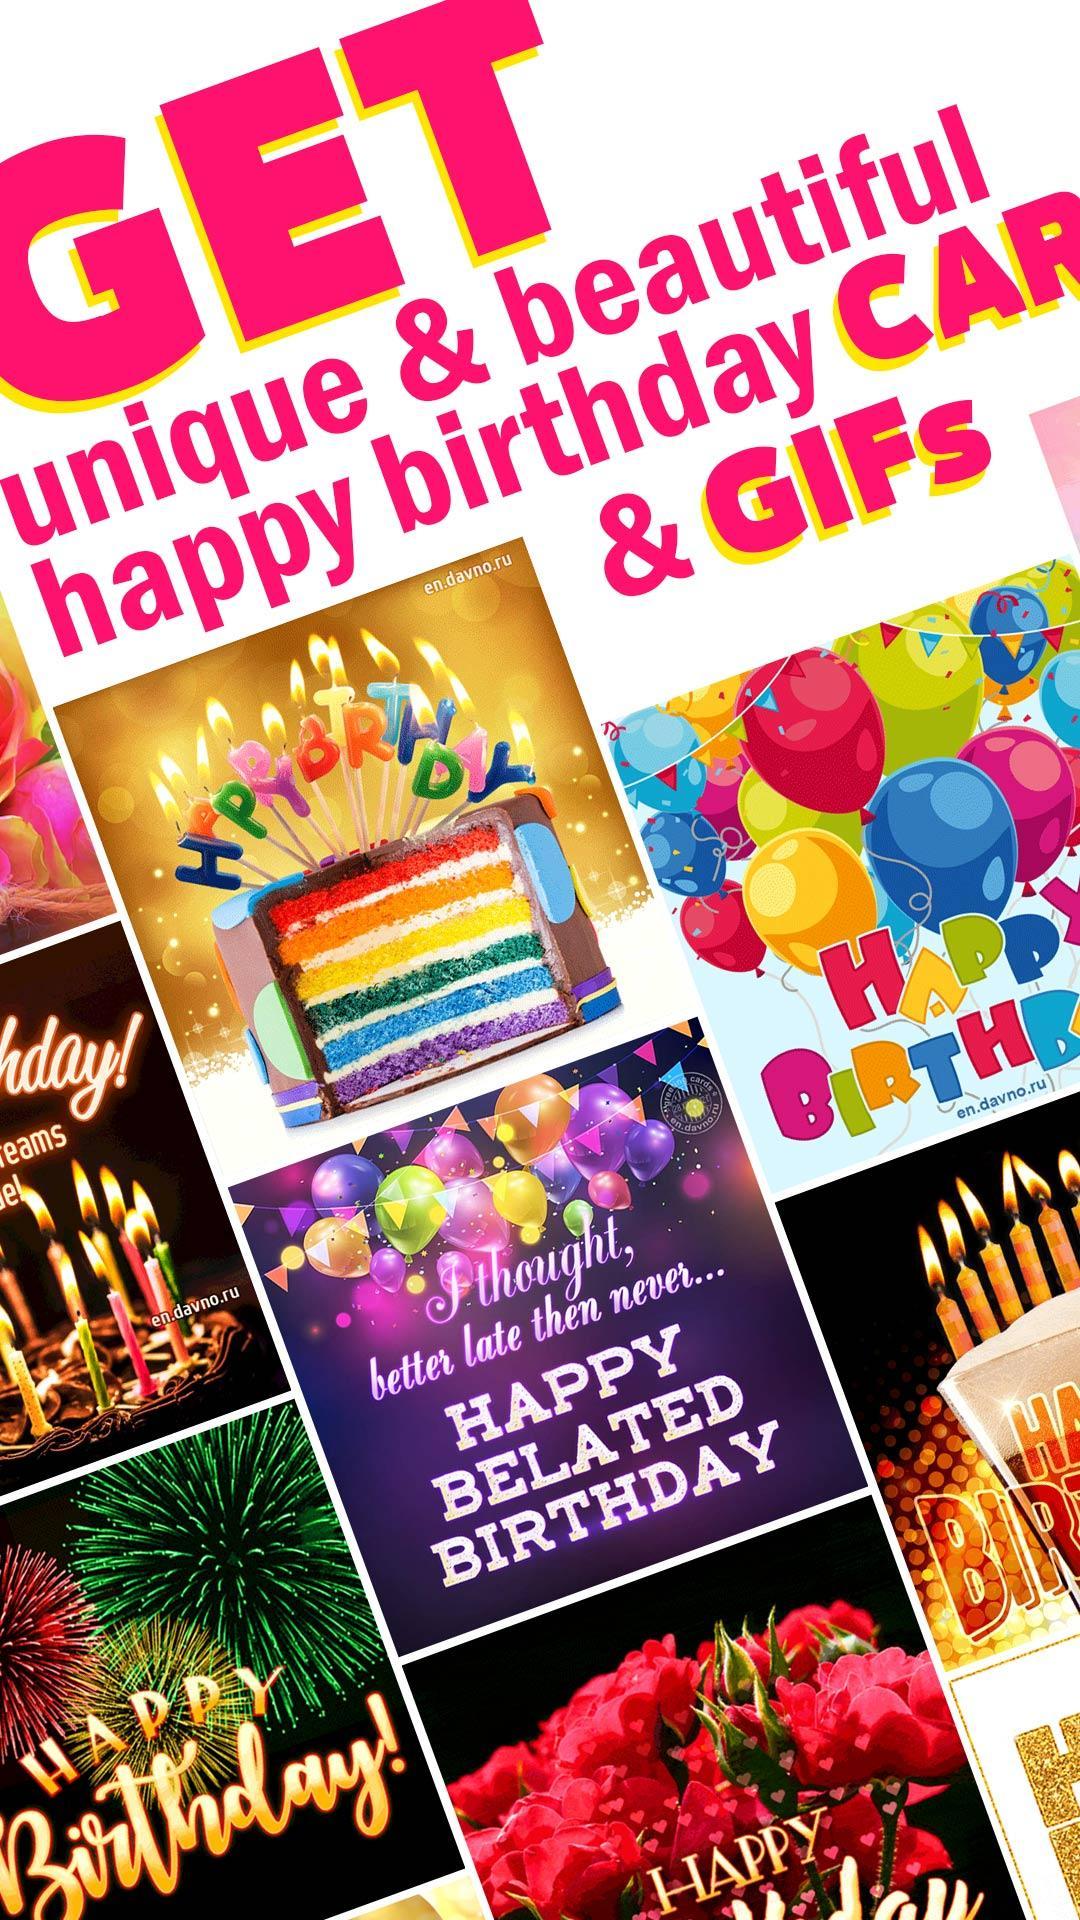 Happy Birthday Cards App for Android - APK Download